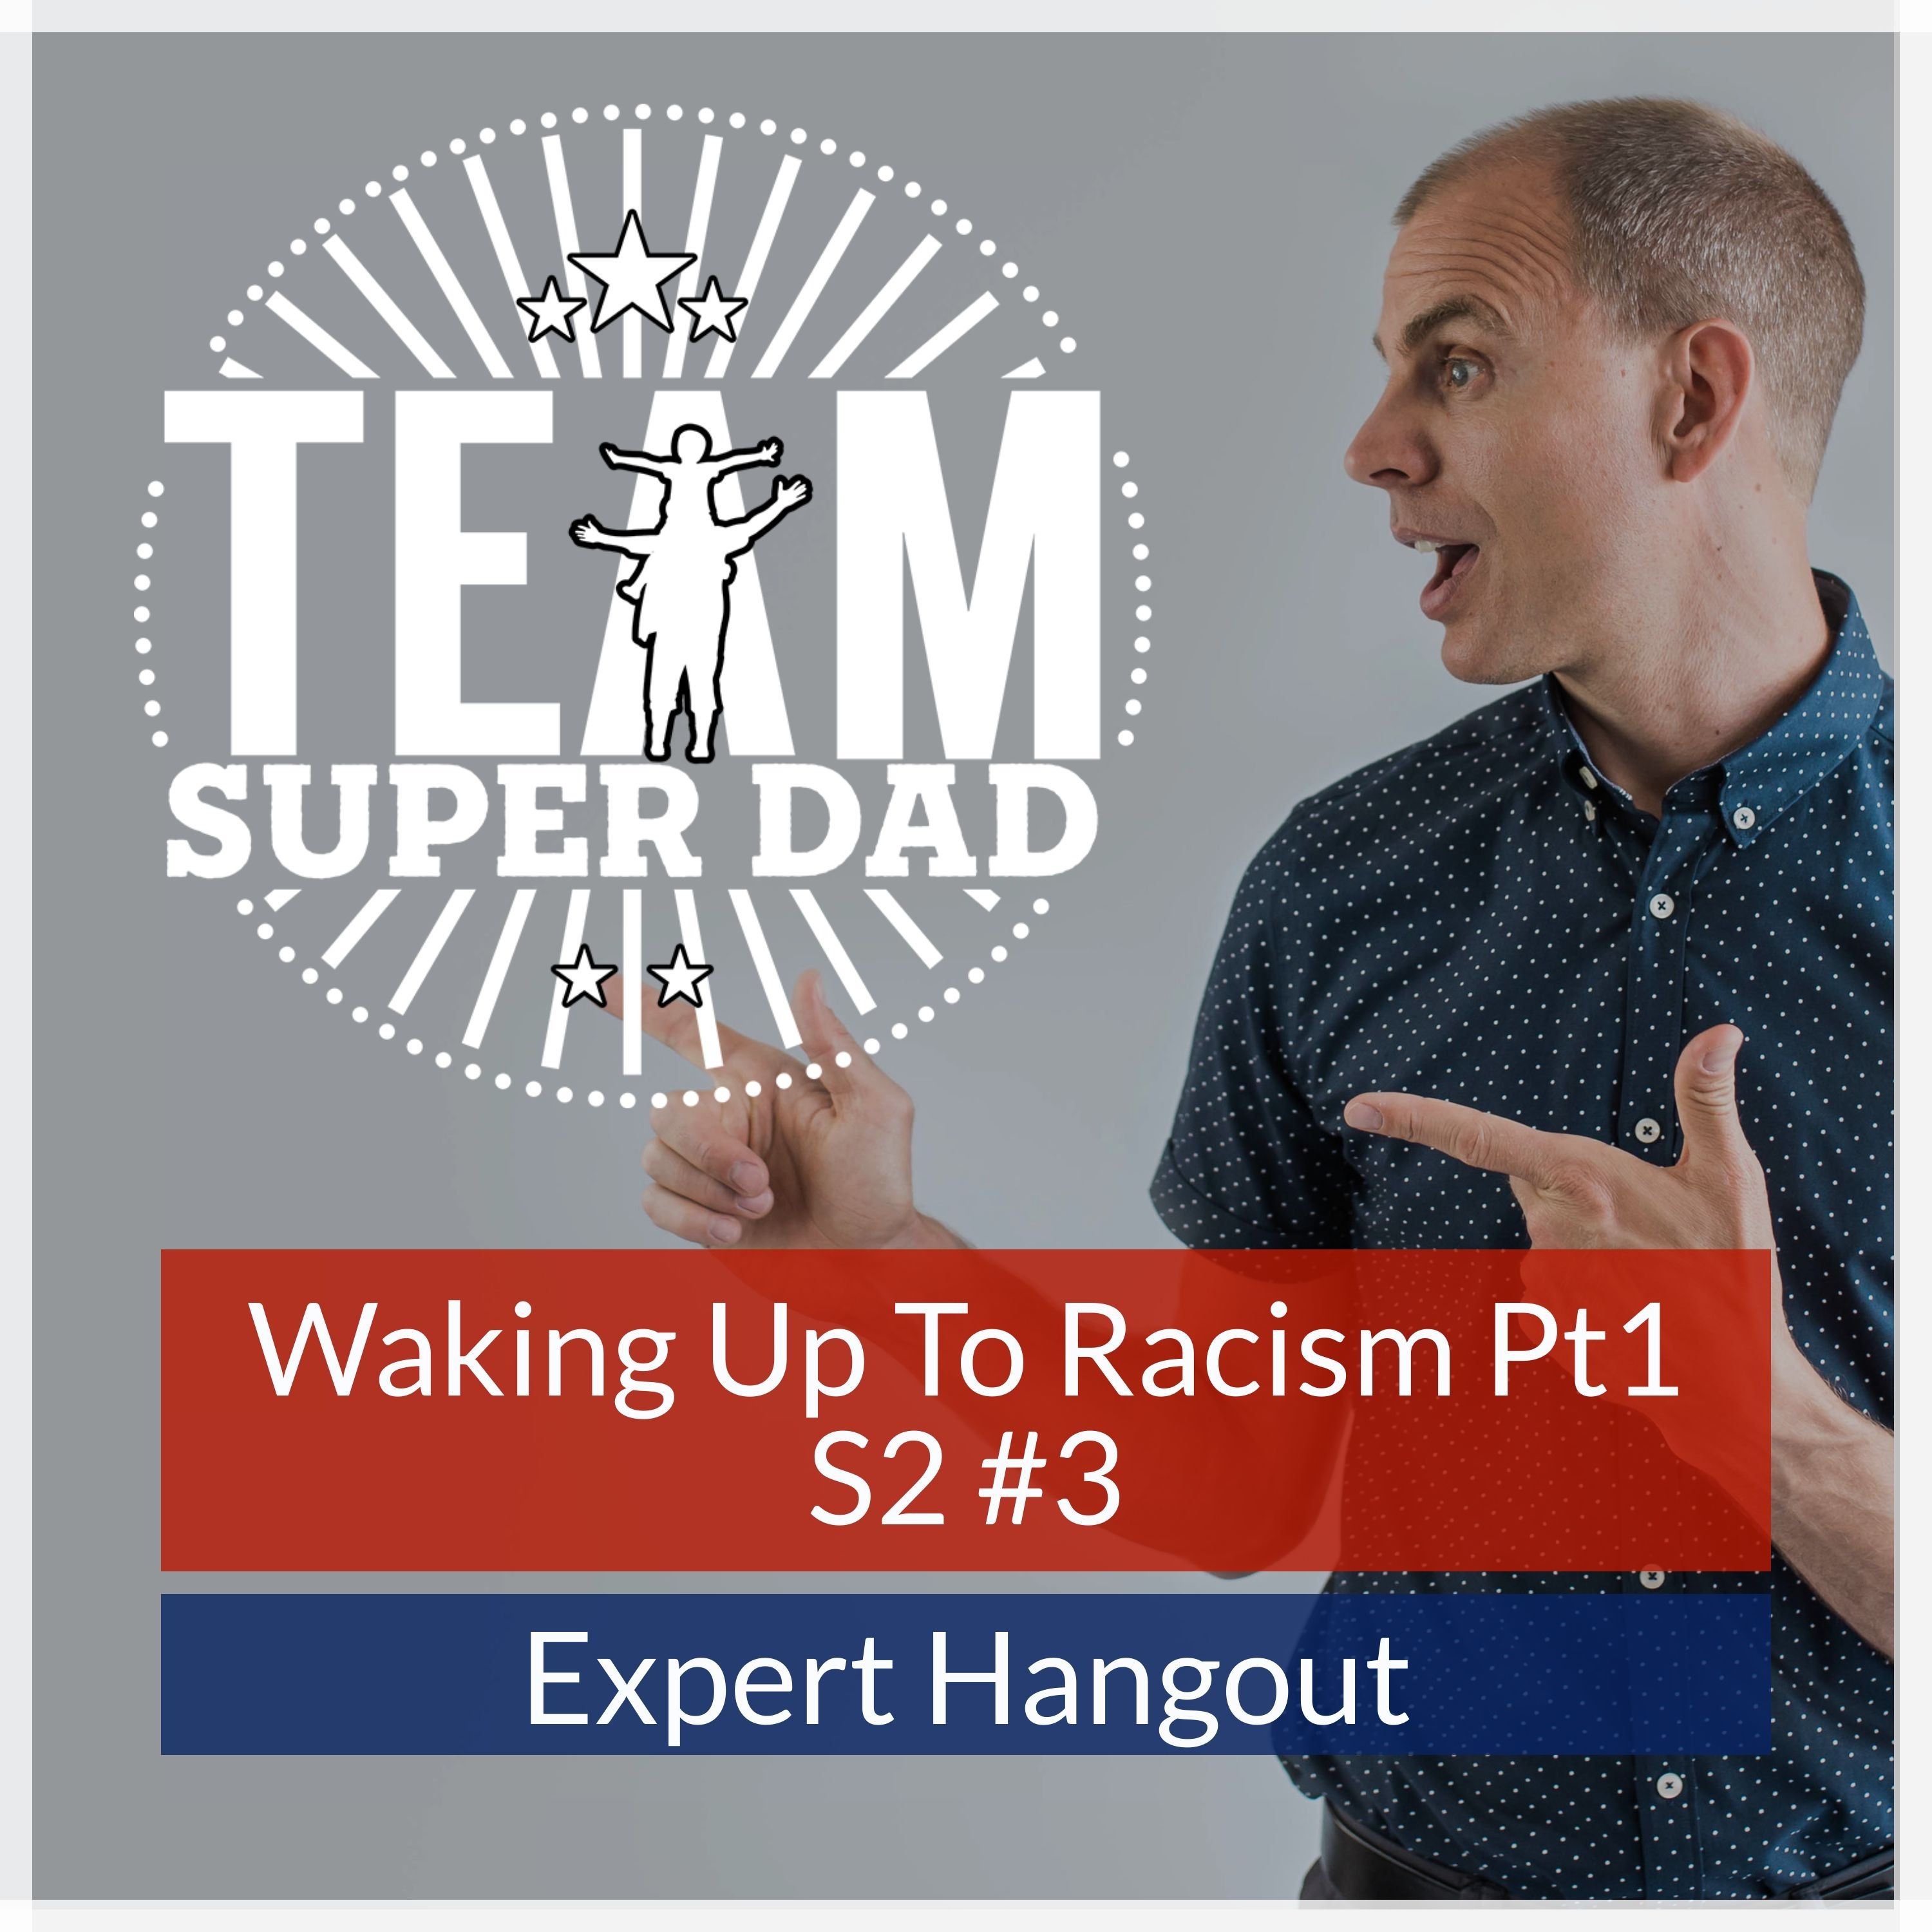 Waking Up To Racism Pt1 - Expert Hangout Podcast